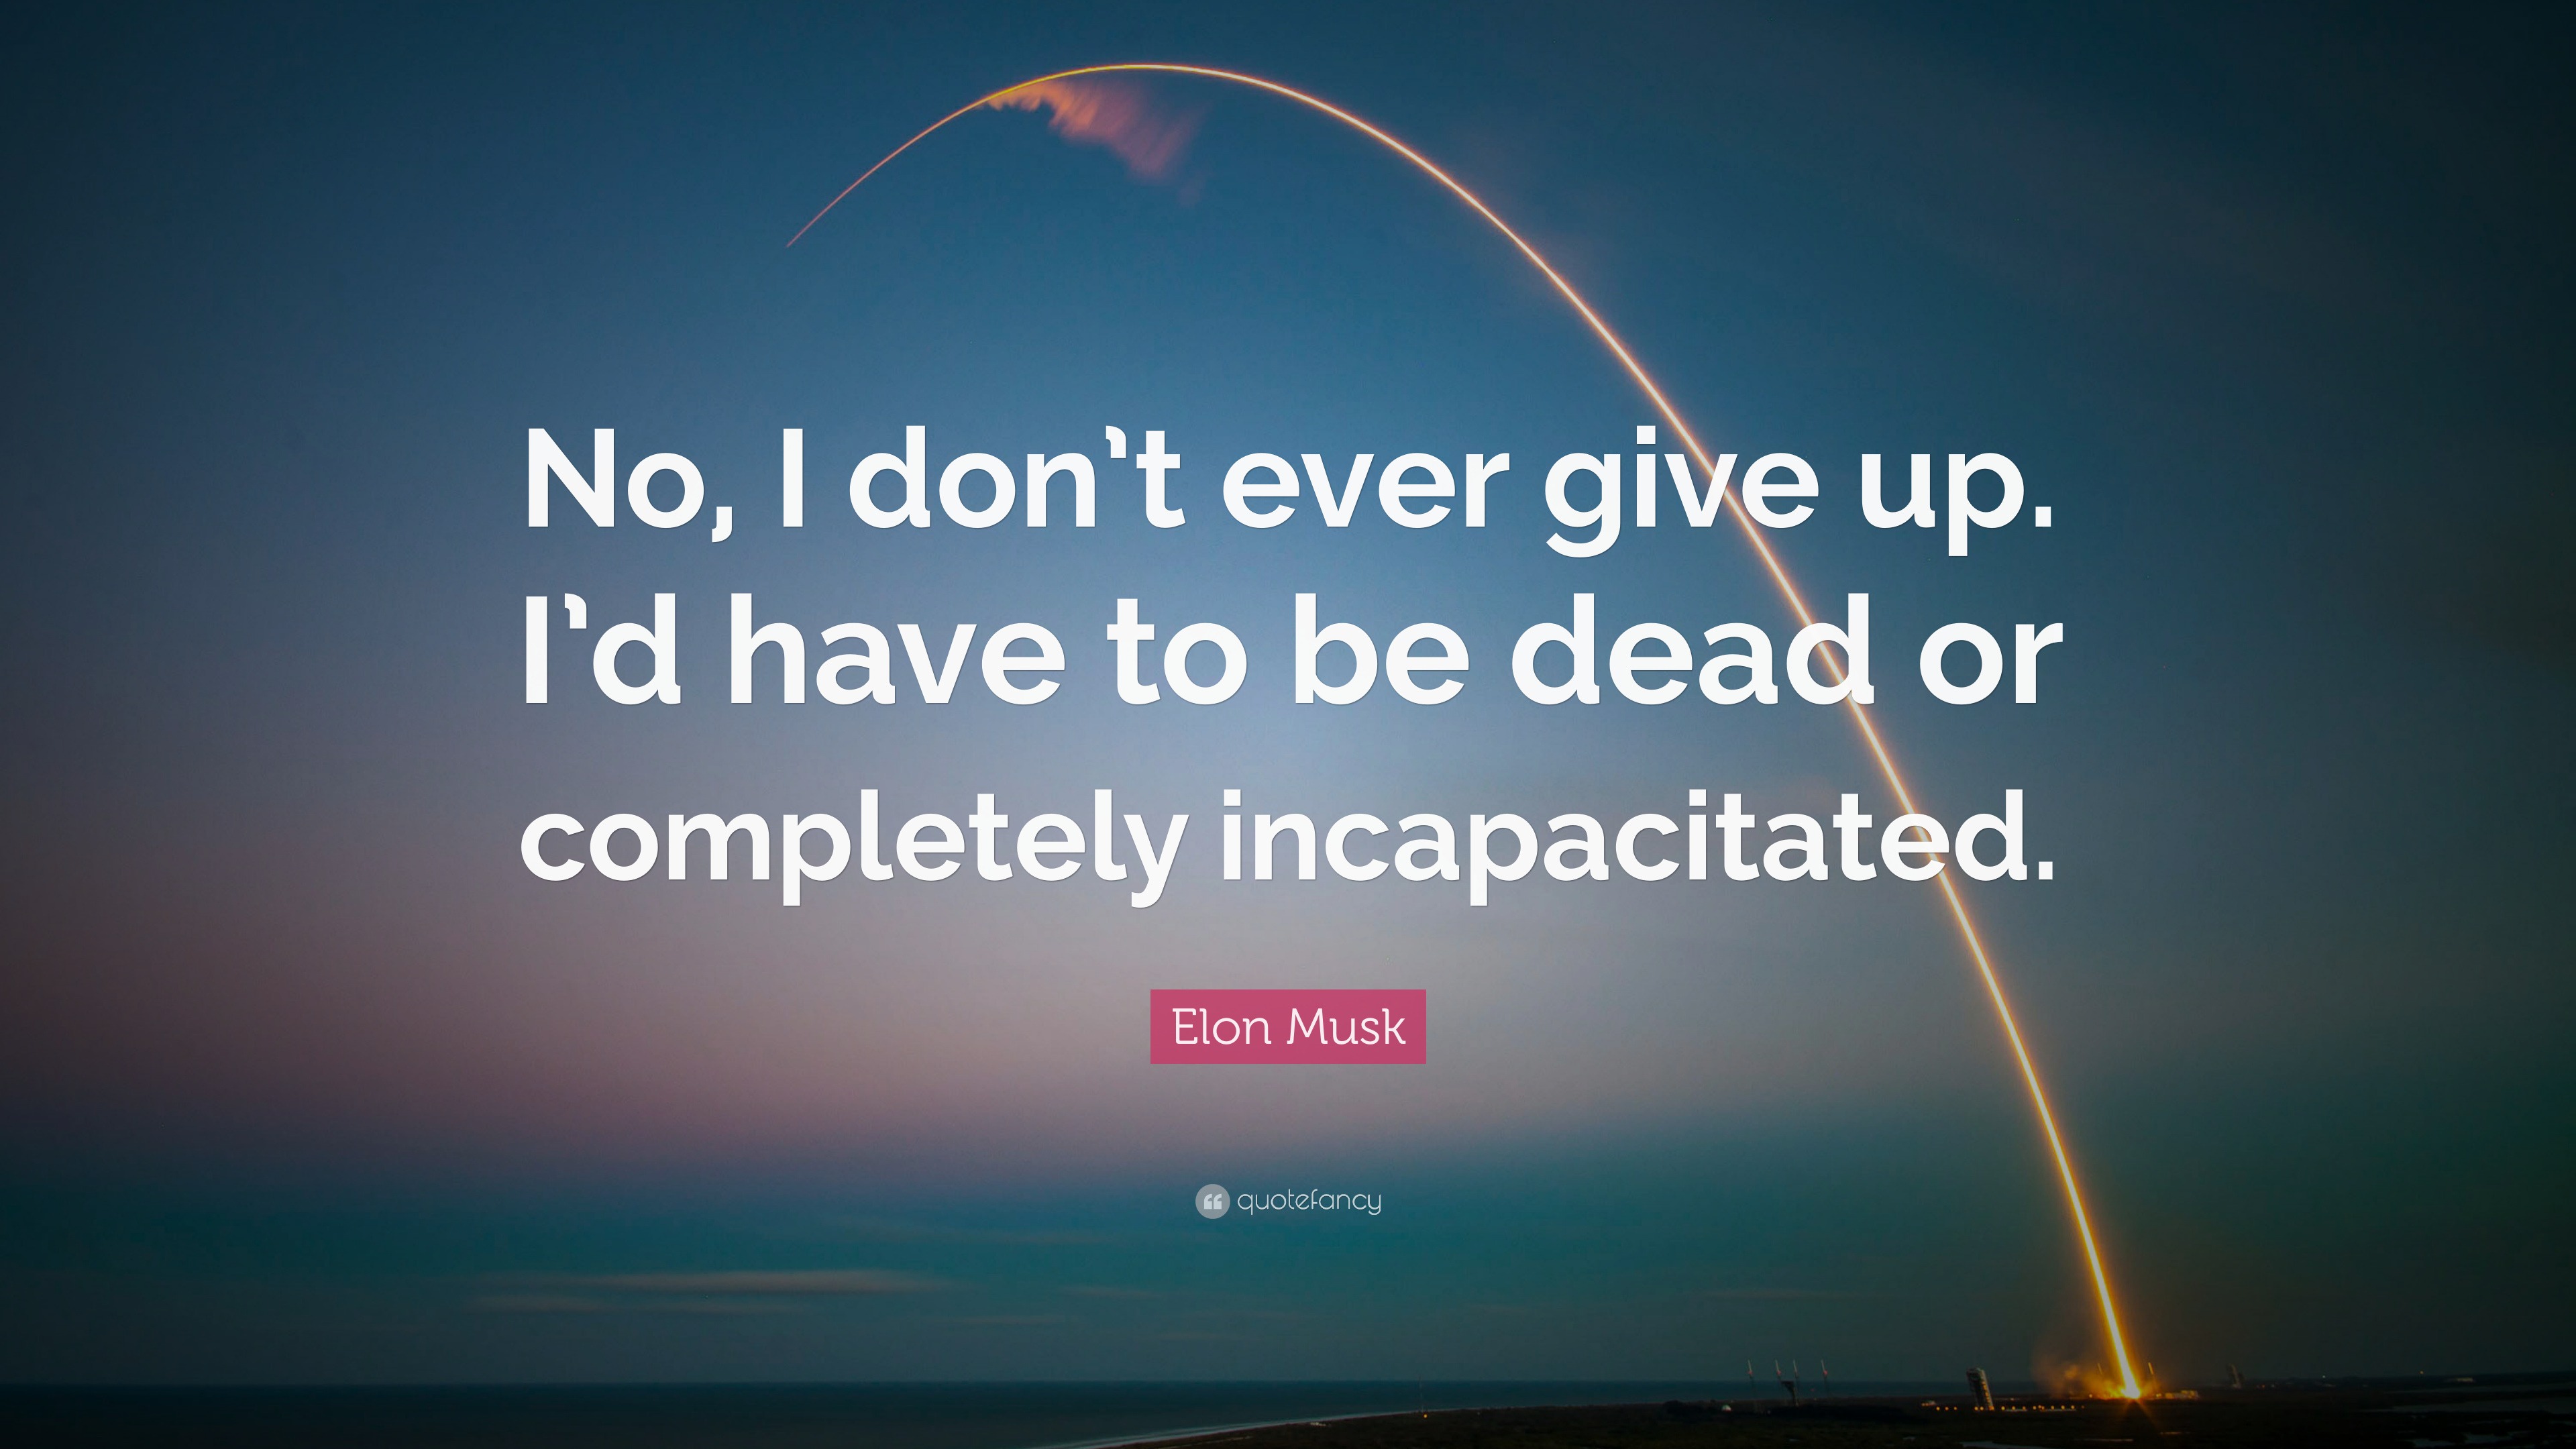 Elon Musk Quote: “No, I don’t ever give up. I’d have to be dead or ...